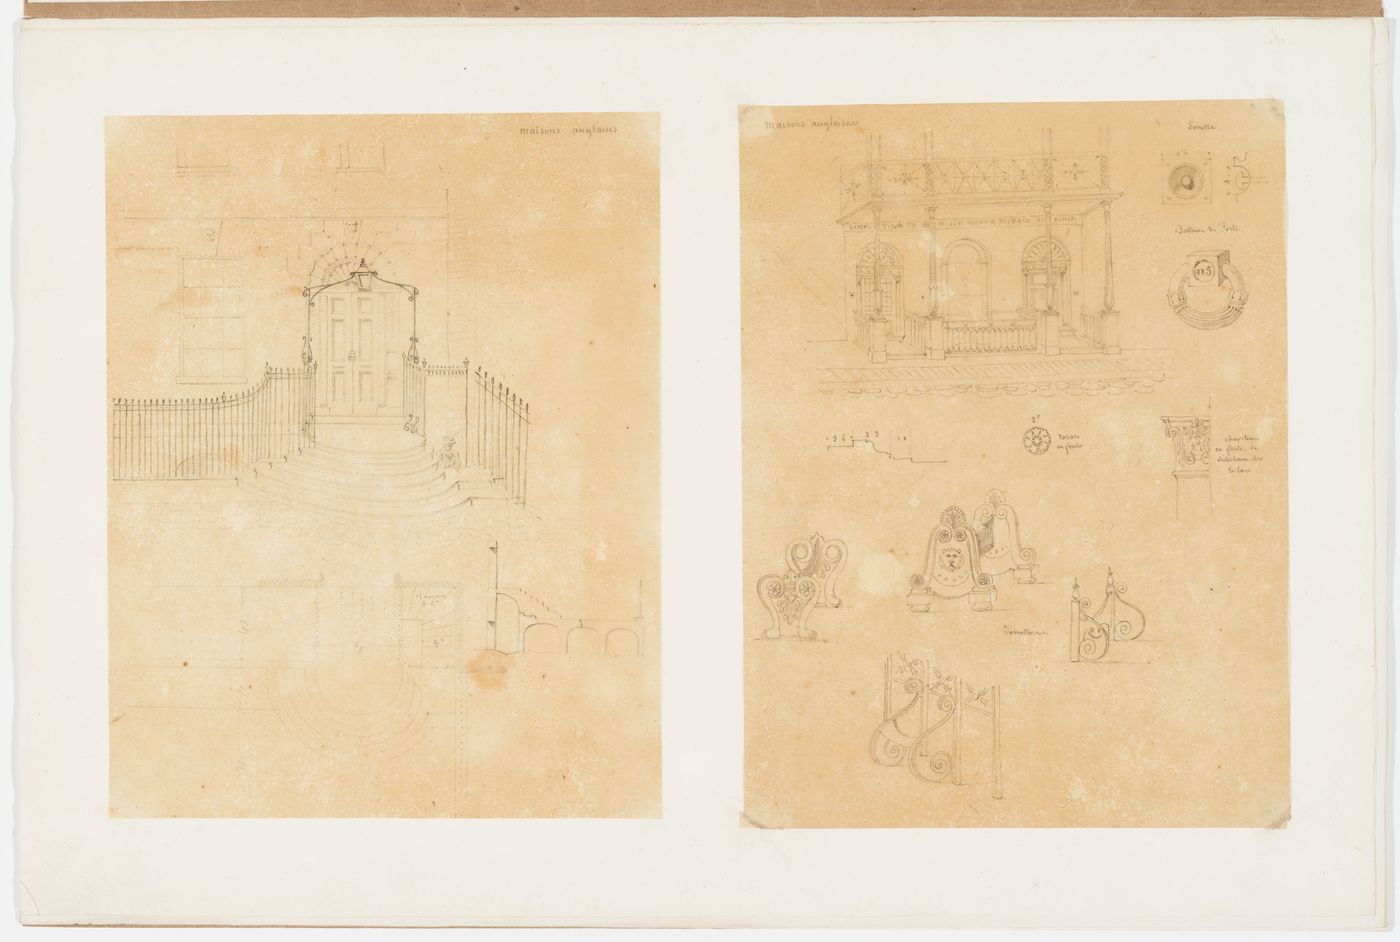 Plan, section, and exterior elevations of an English late Georgian or early Regency house